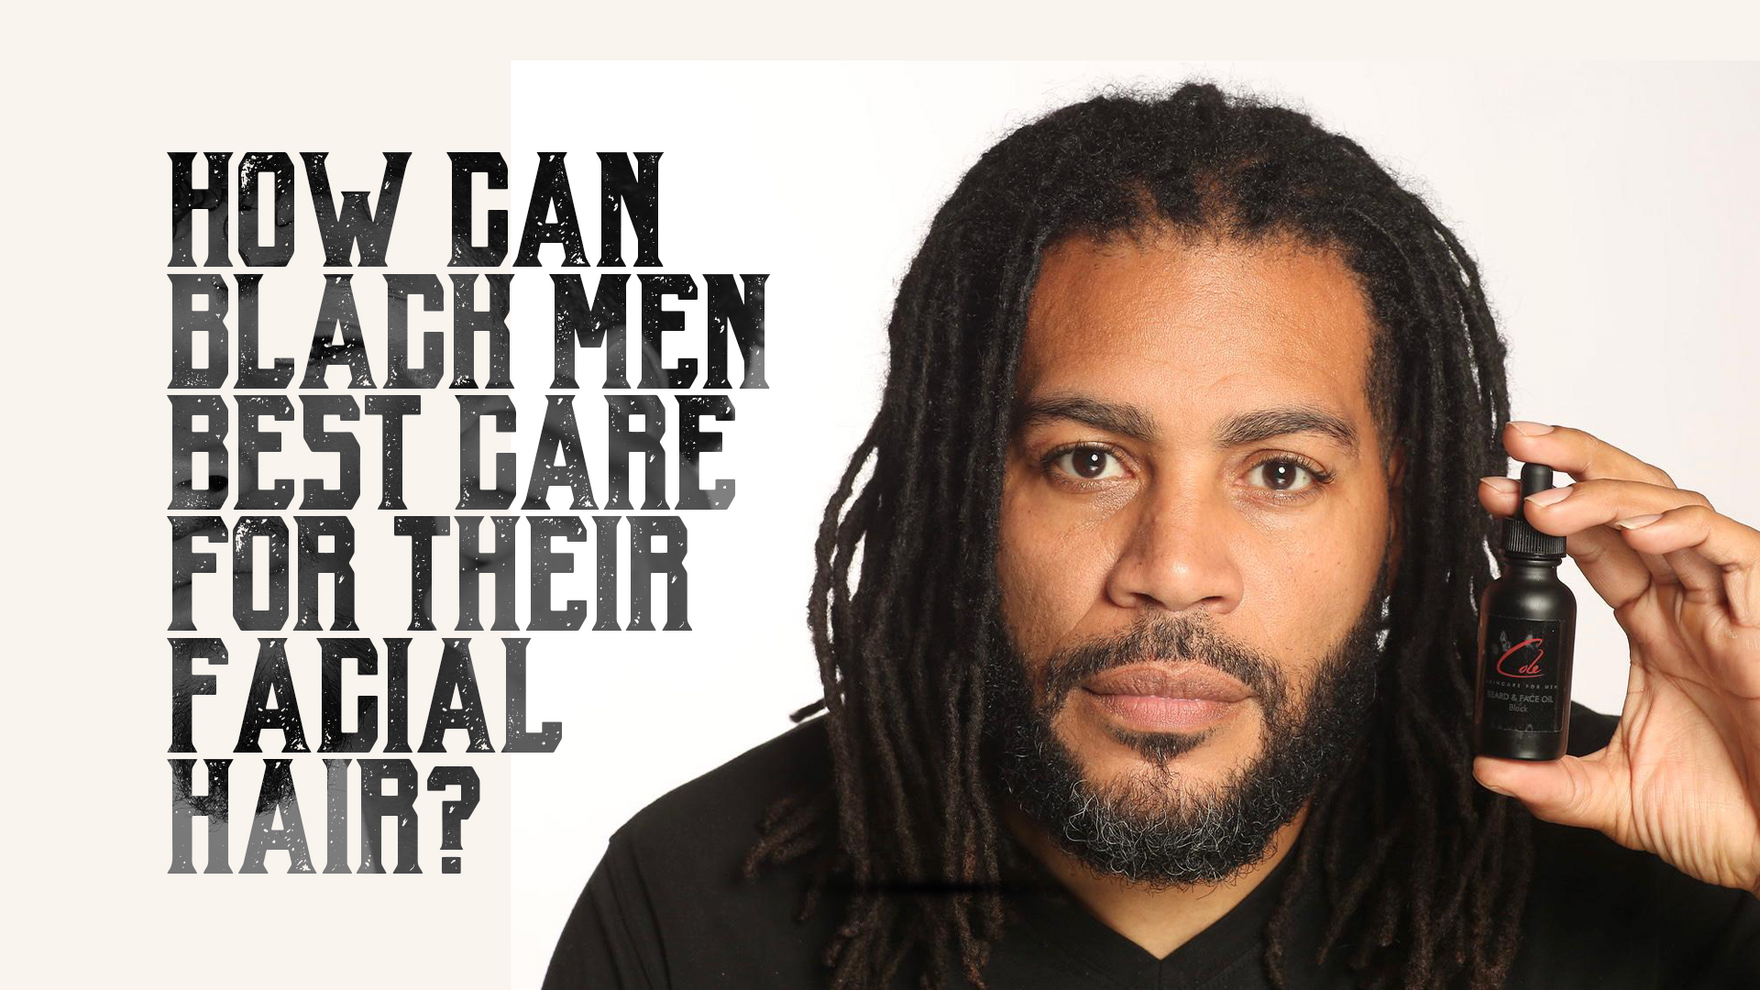 How Can Black Men Best Care For Their Facial Hair?